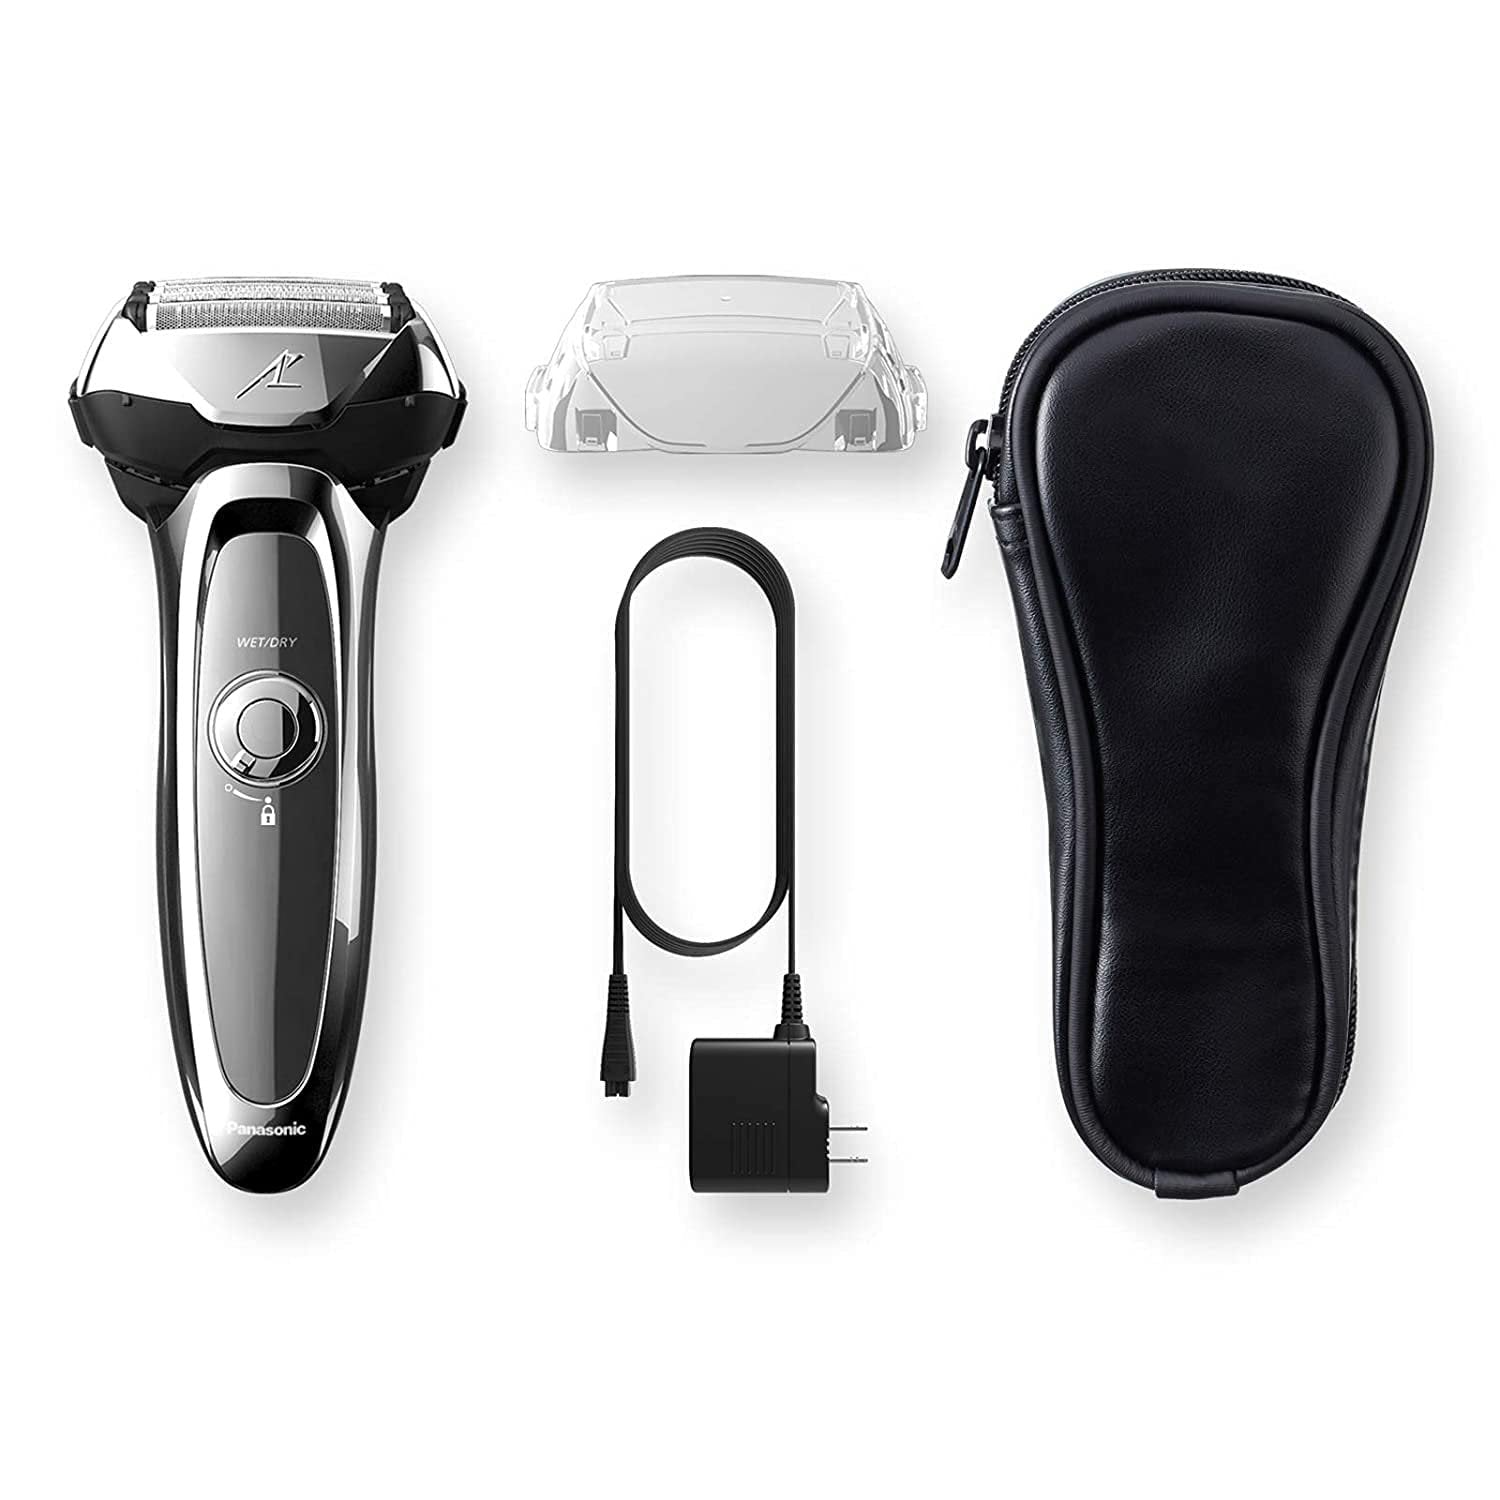 Panasonic Arc5 Electric Razor, Men's 5-Blade Cordless with Shave Sensor Technology and Wet/Dry Convenience, ES-LV65-S